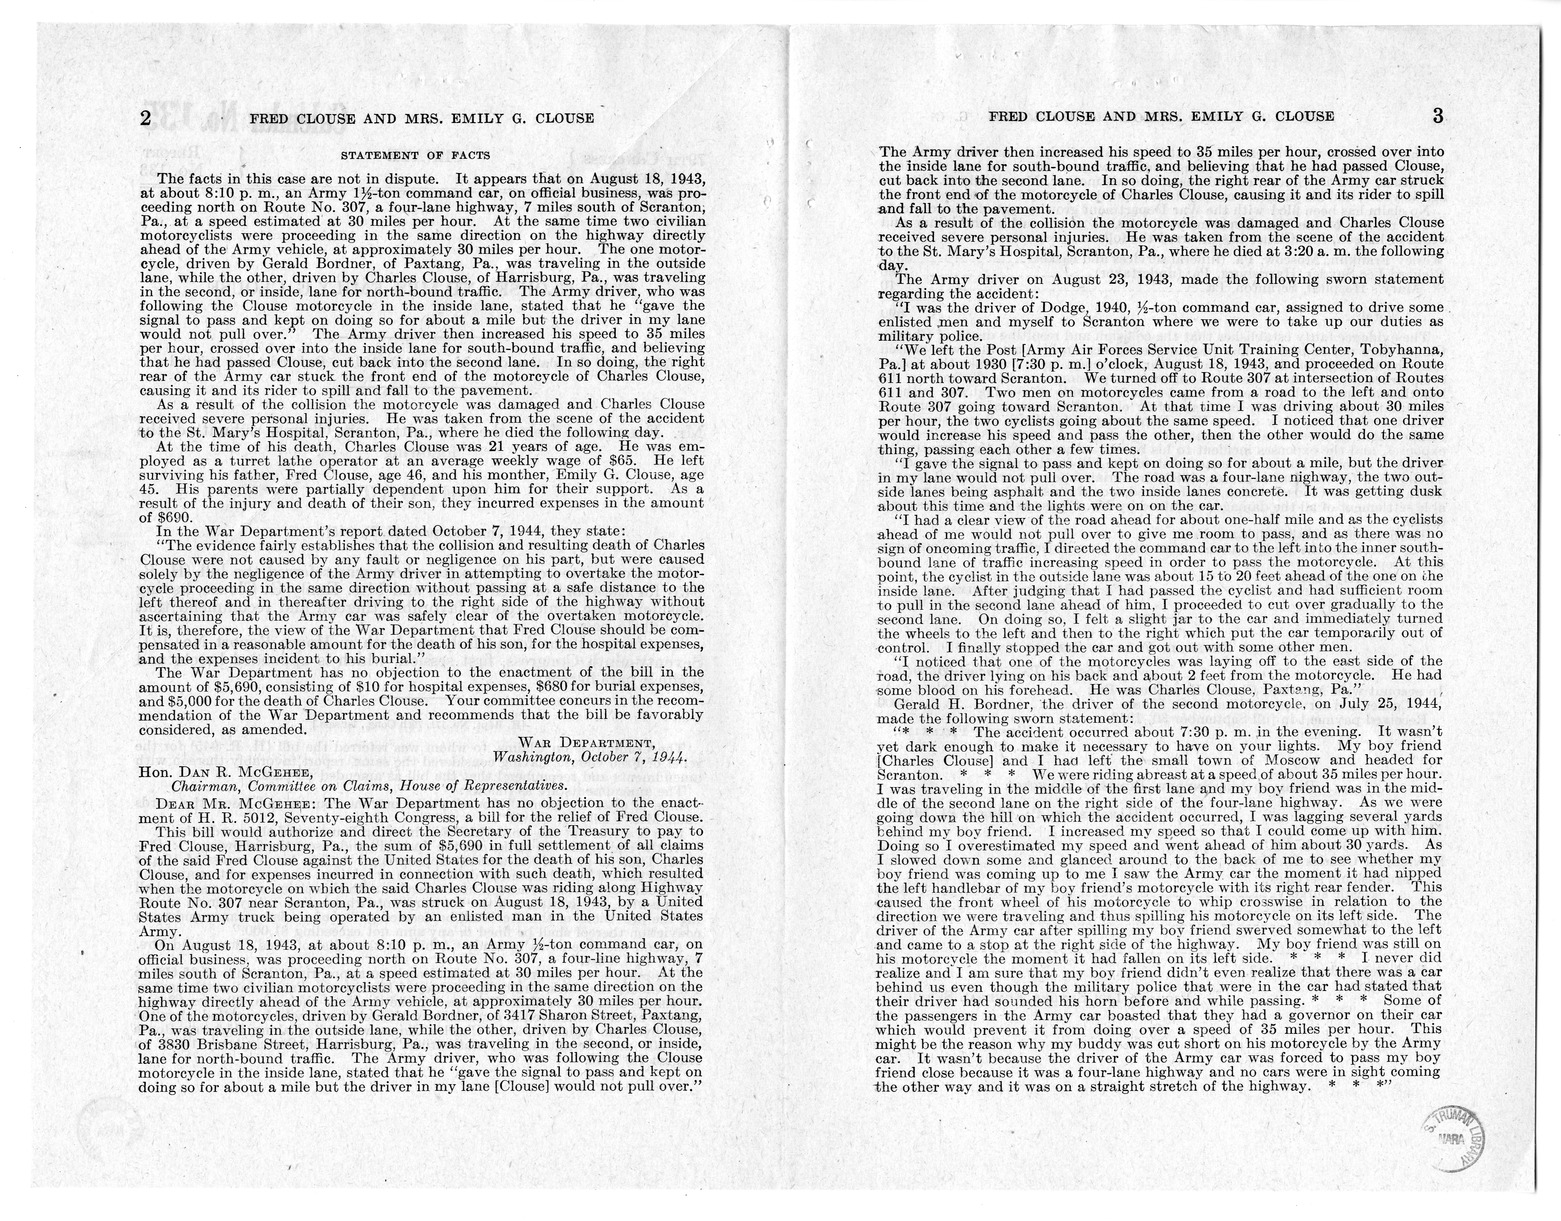 Memorandum from Frederick J. Bailey to M. C. Latta, H.R. 945, For the Relief of Fred Clouse and Mrs. Emily G. Clouse, with Attachments